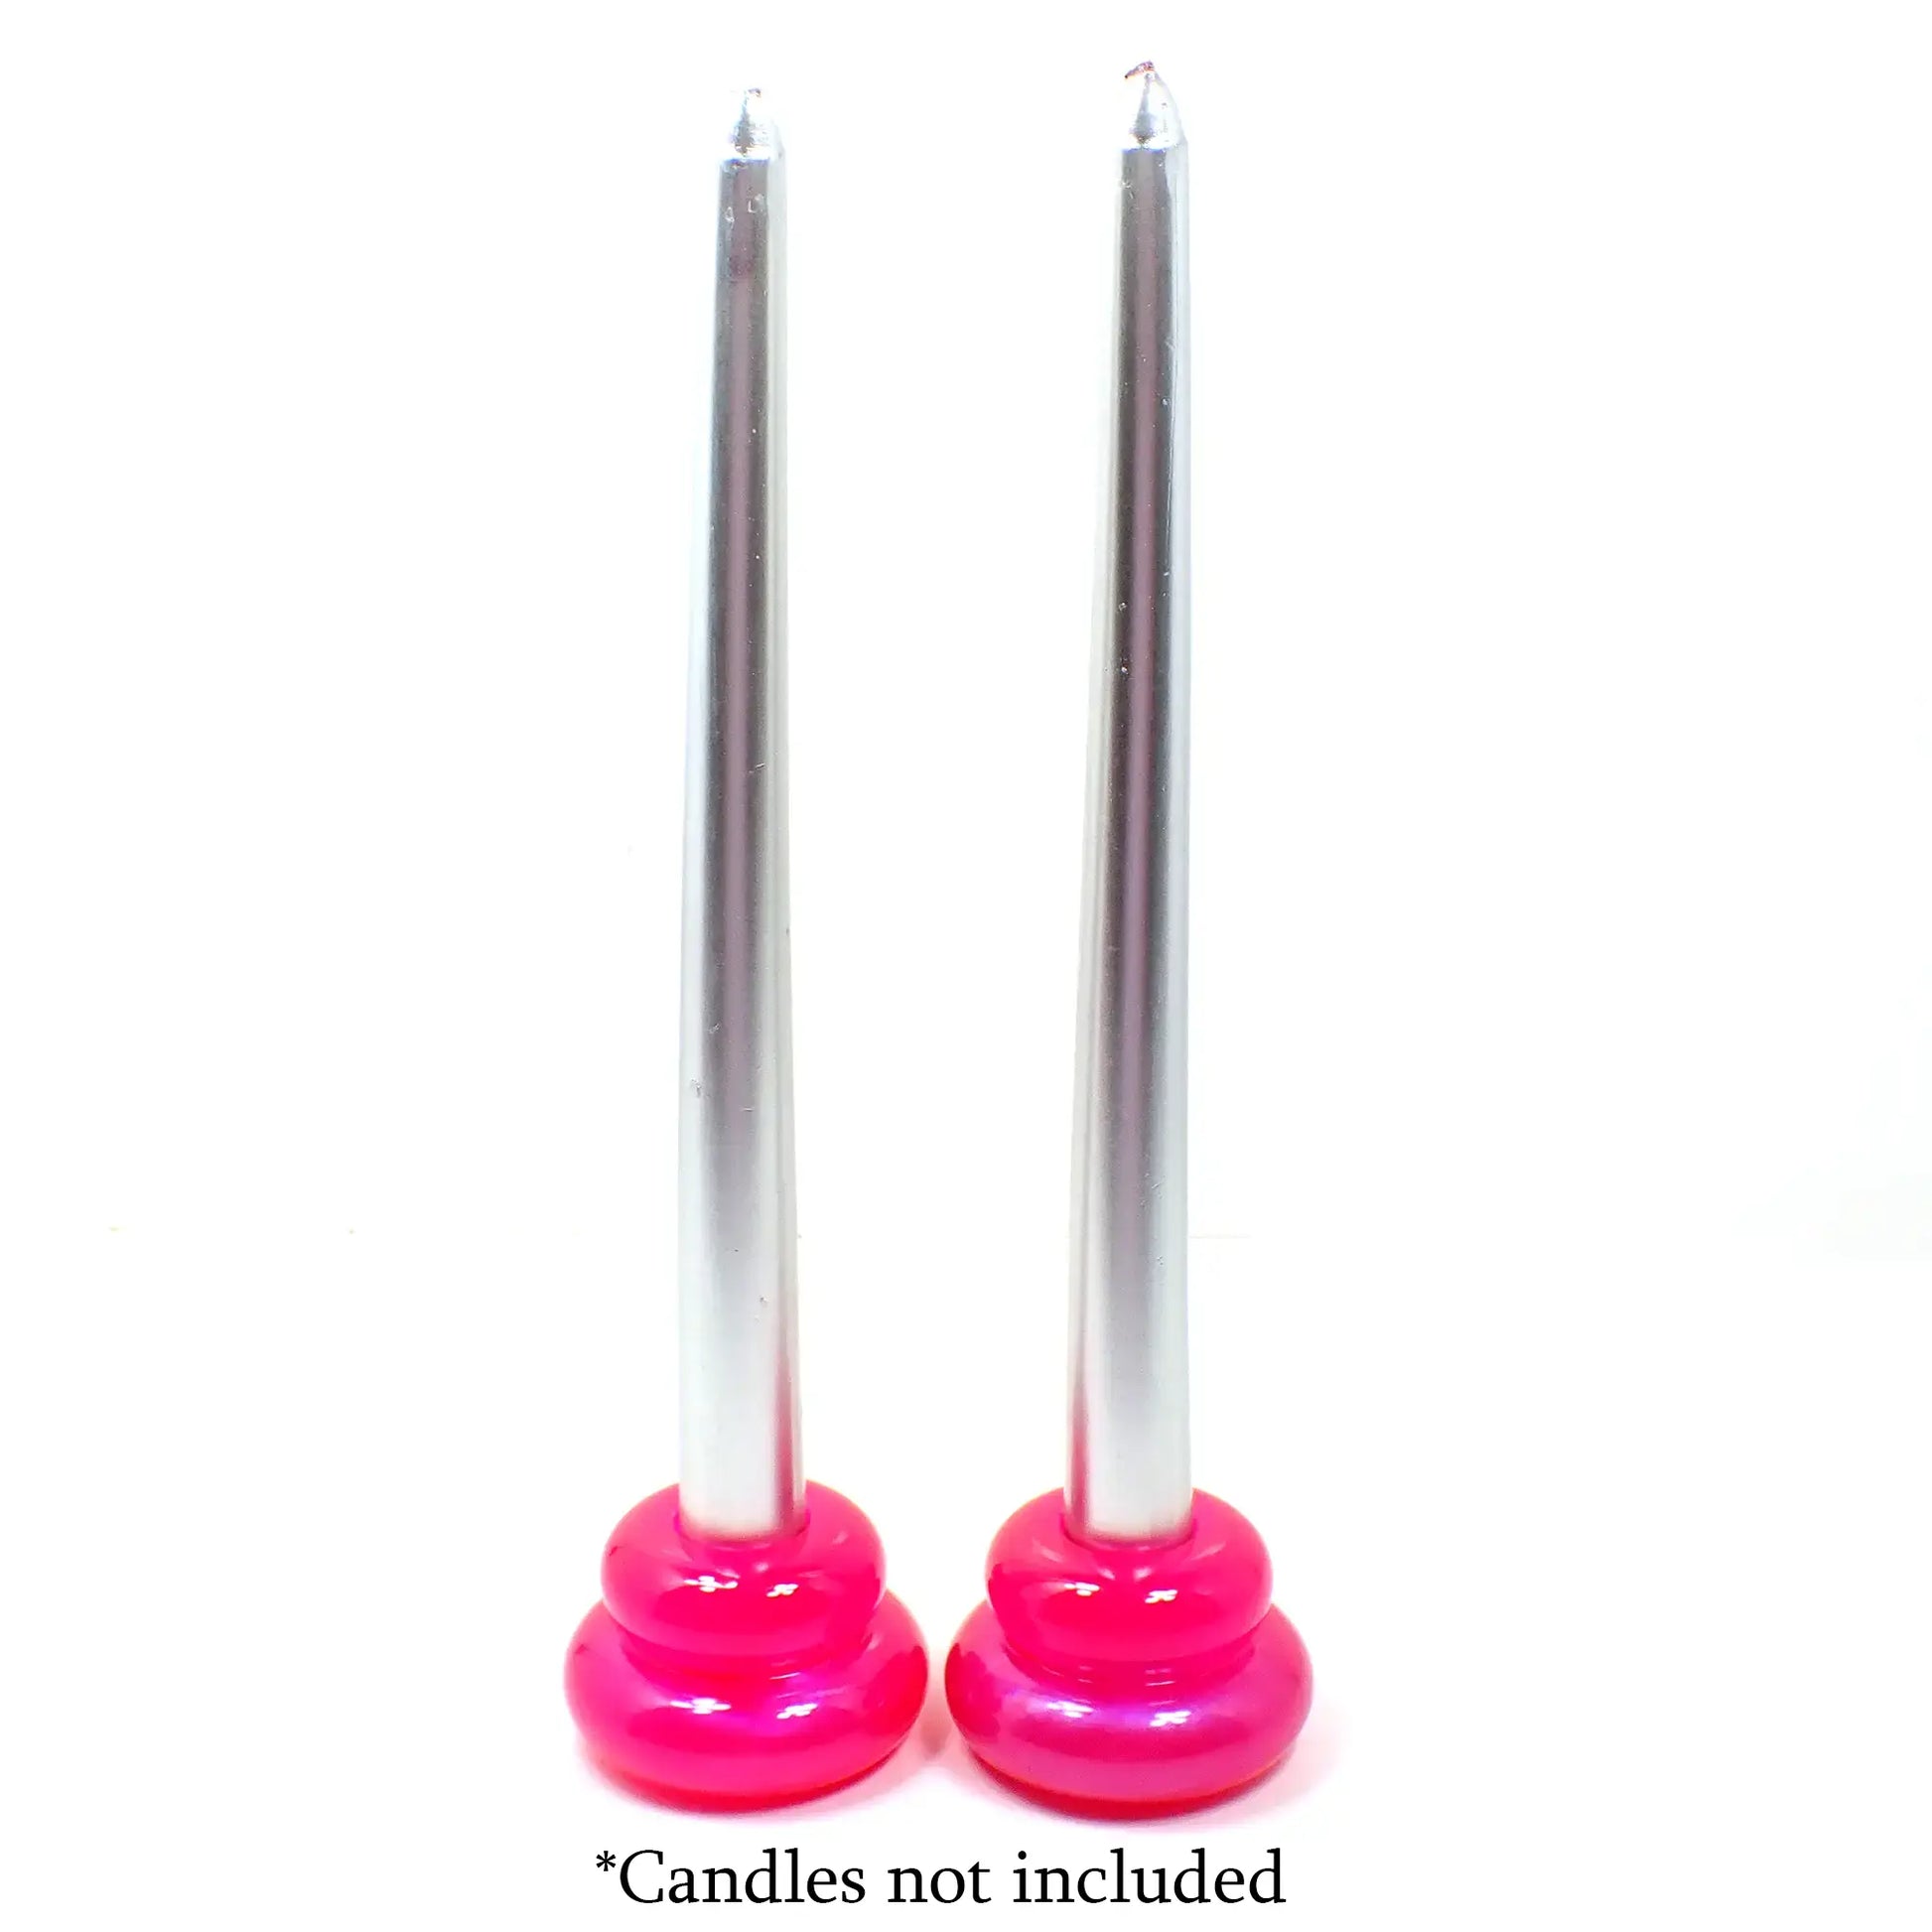 Photo showing how the handmade puffy double ring candlestick holders look with candles in them. The candles being shown are silver in color and the candlestick holders are bright pink. At the bottom are the words "Candles not included."